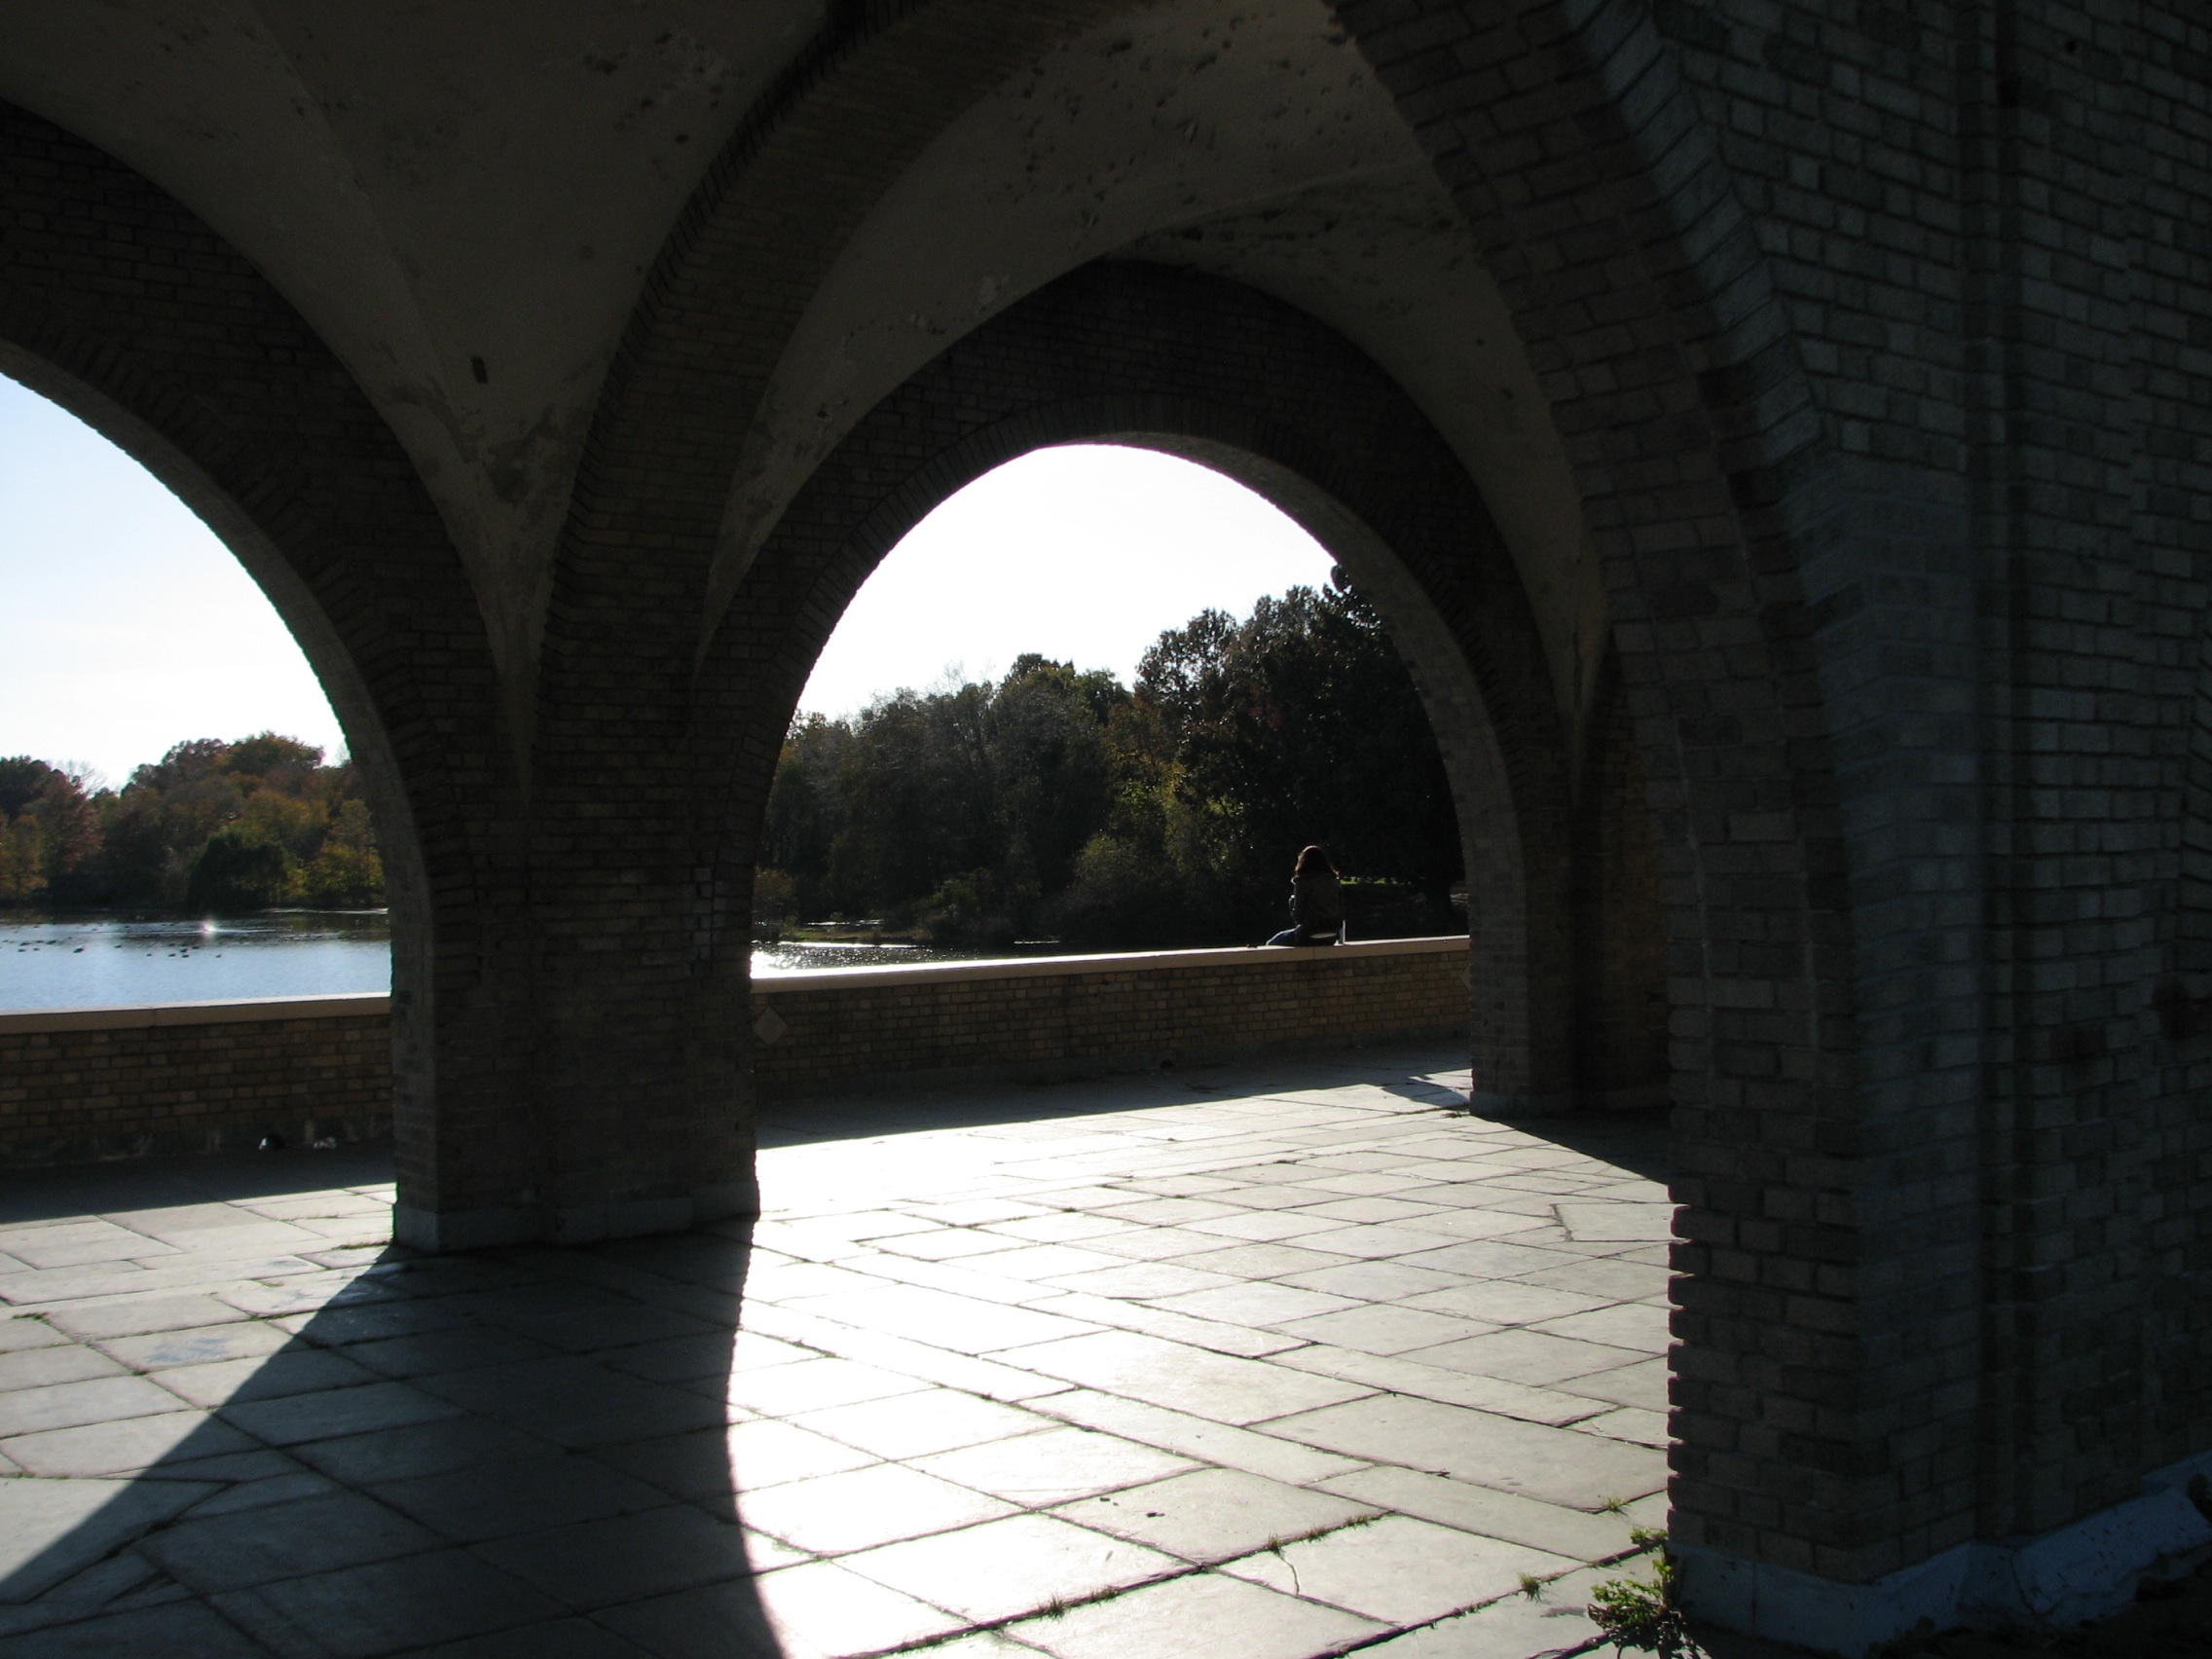 The arches of the Tea House frame magnificent views of the park.